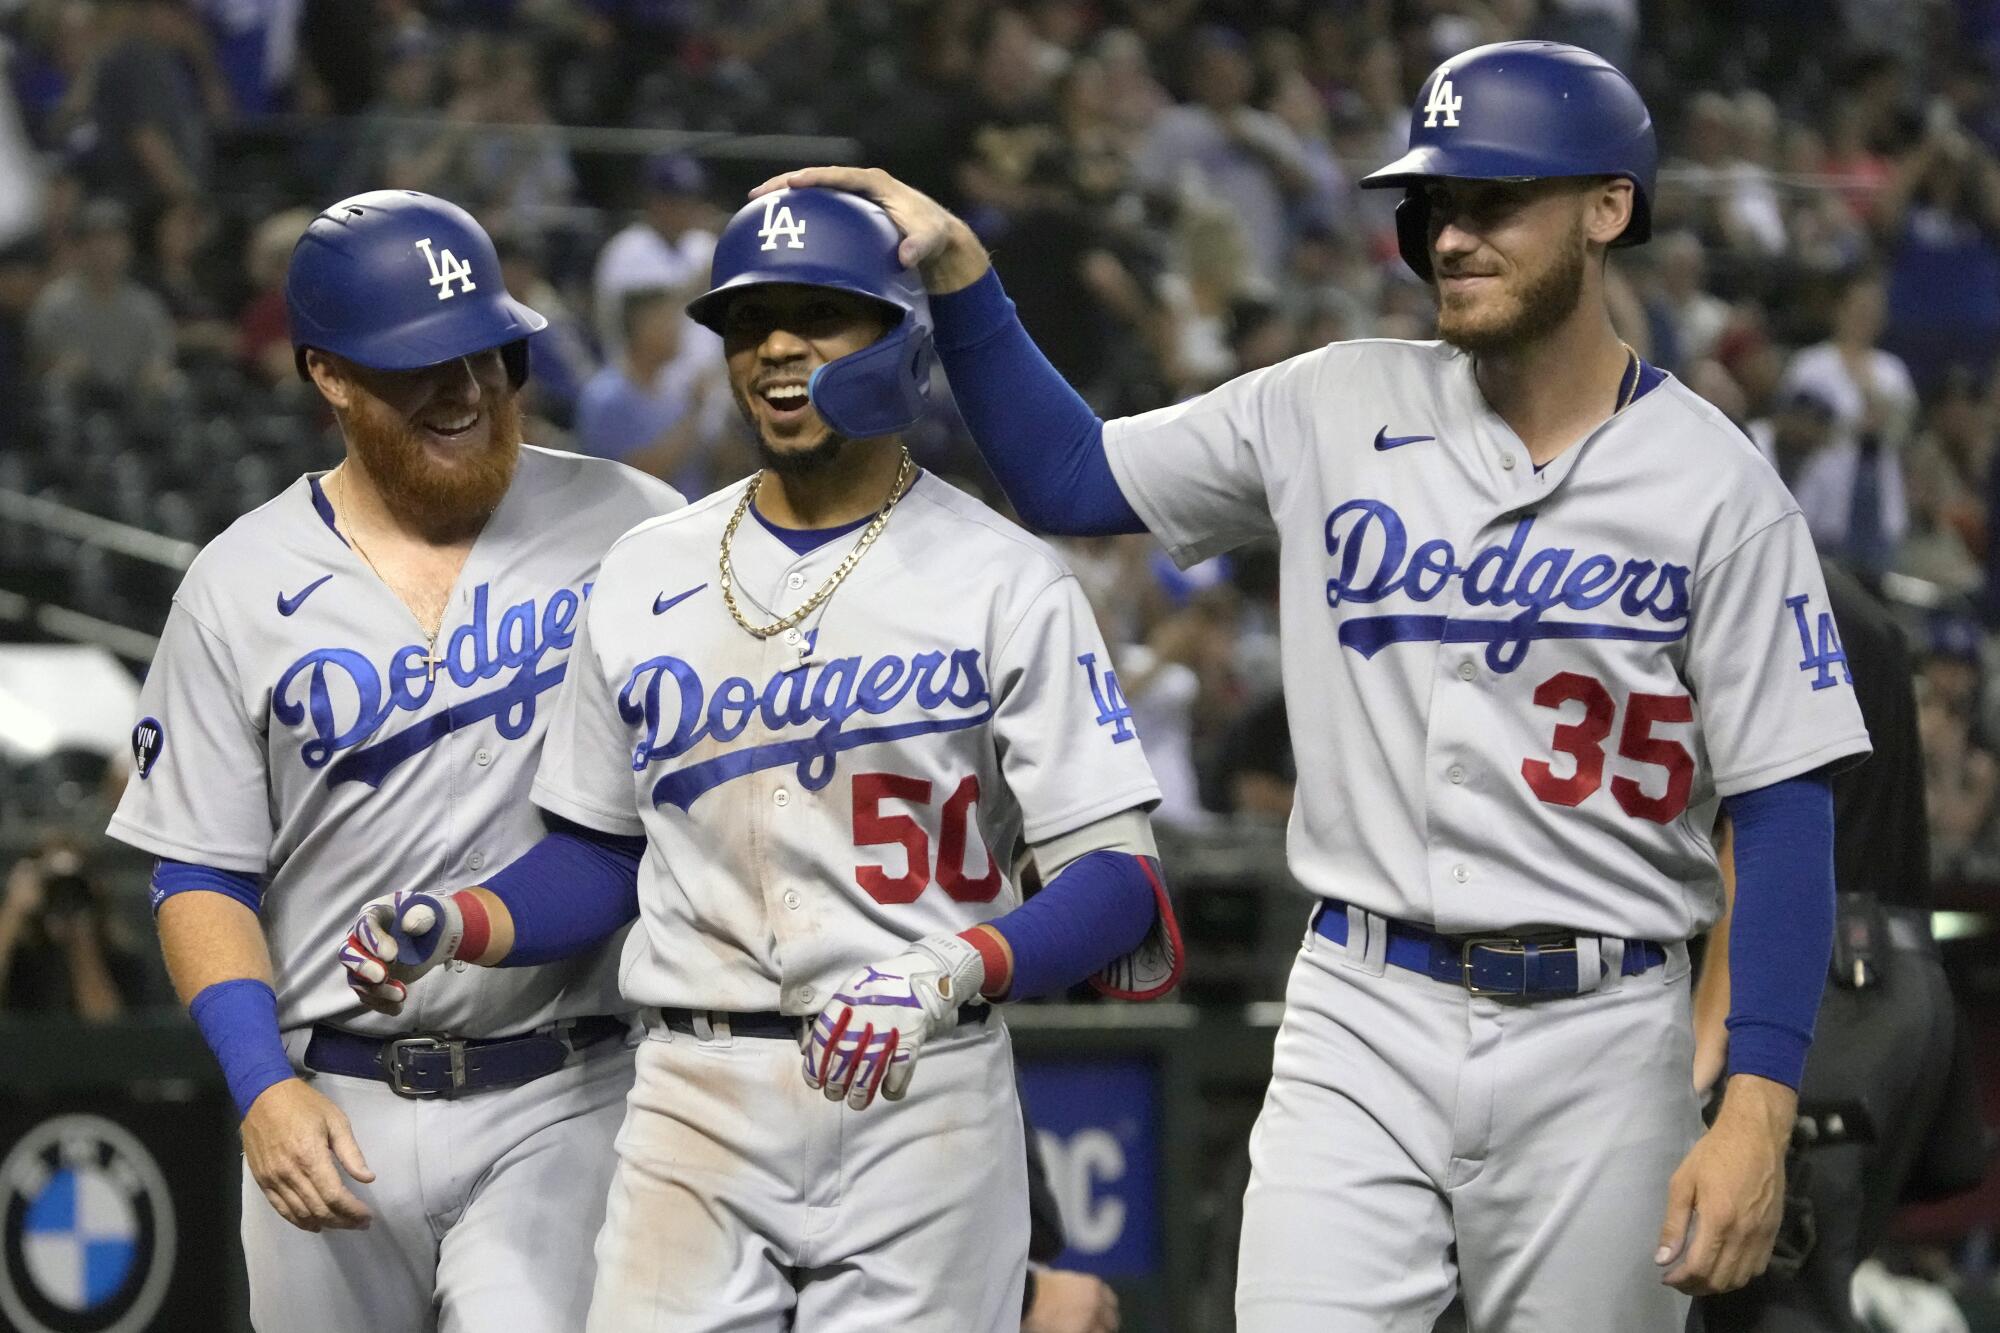 Mookie Betts celebrates with Dodgers teammates Justin Turner and Cody Bellinger after hitting a three-run home run.